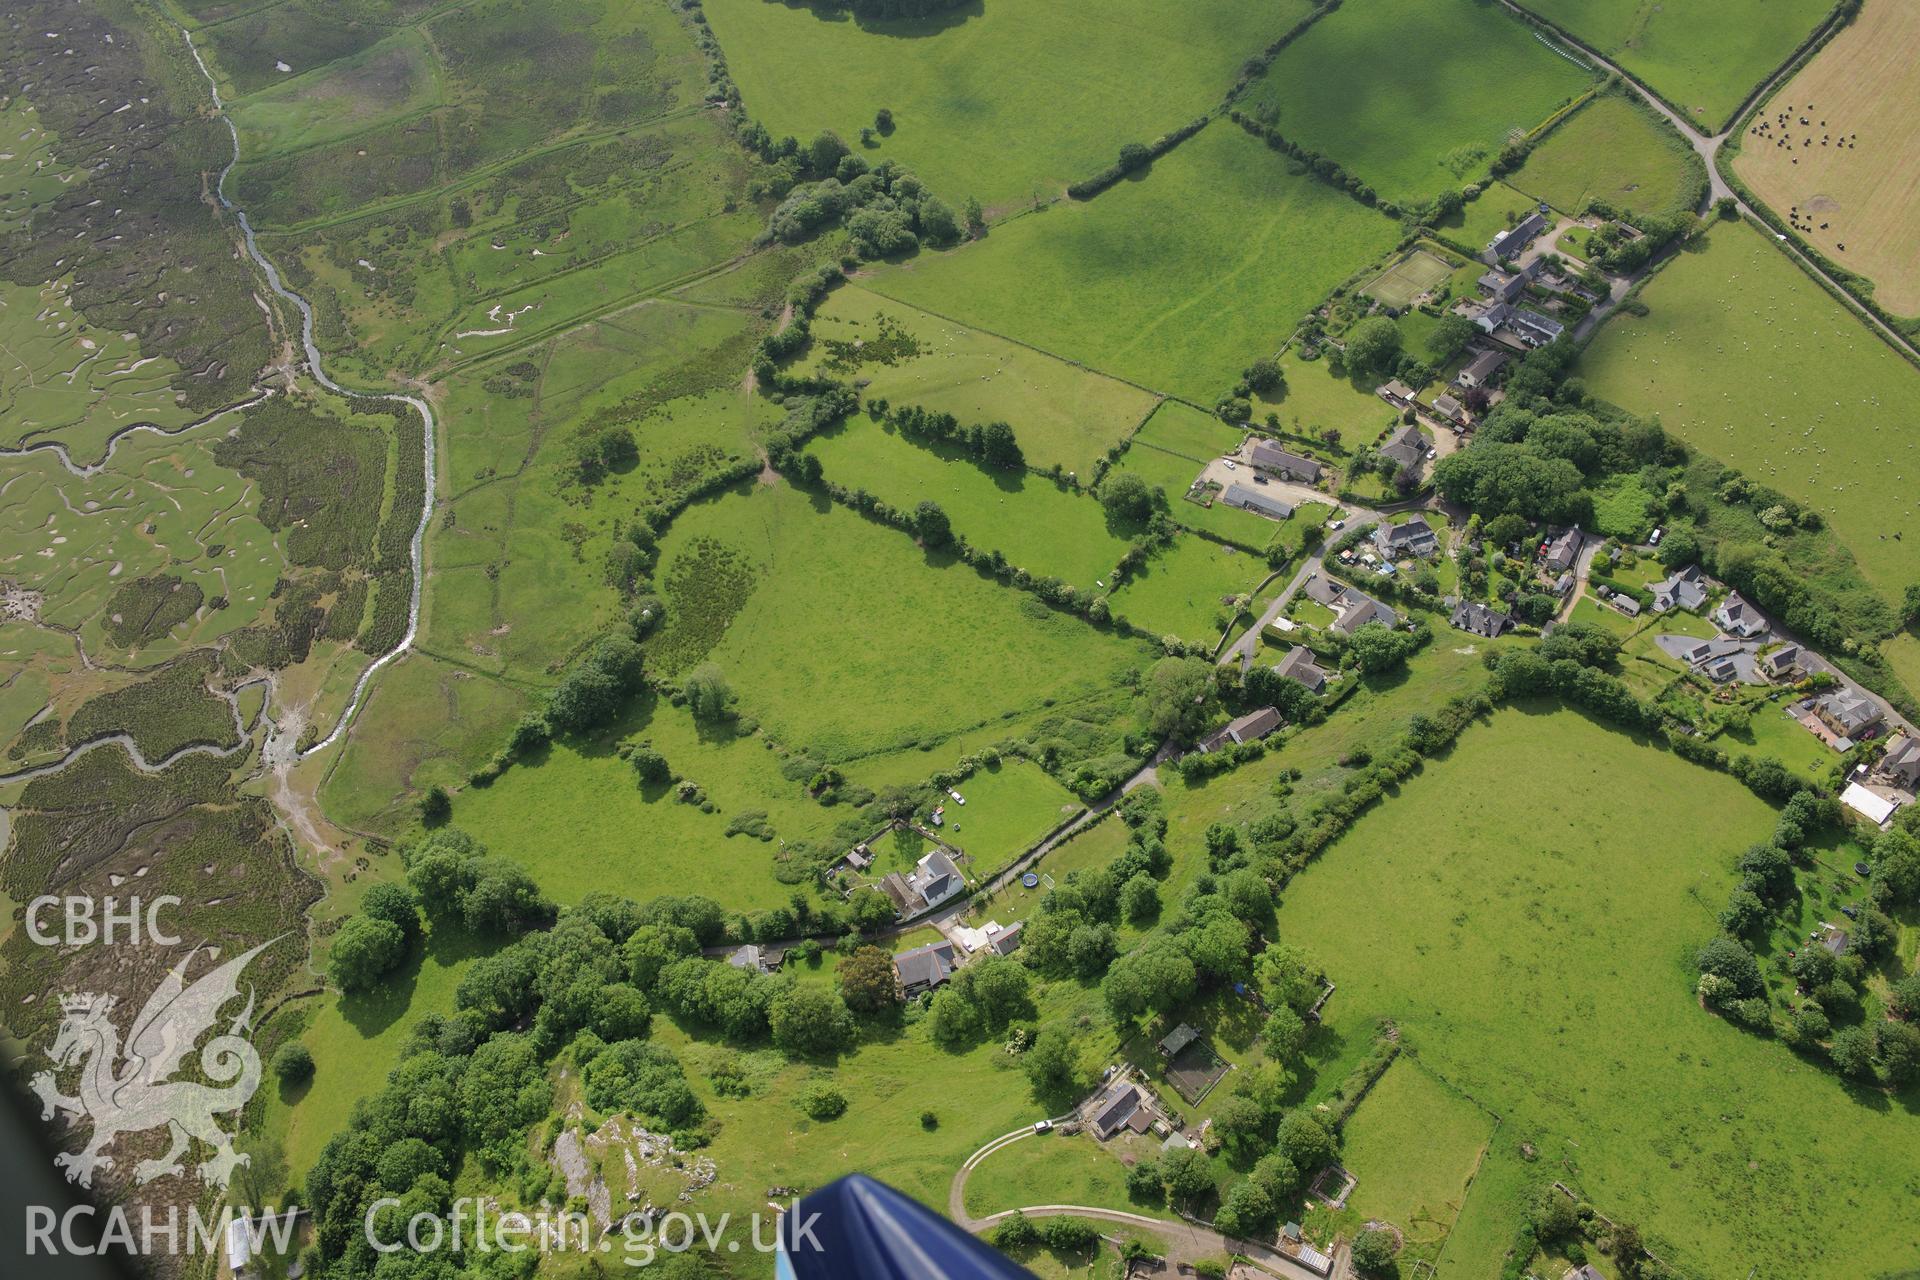 Landimor Castle; Landimore Farm and Cheriton shrunken village. Oblique aerial photograph taken during the Royal Commission's programme of archaeological aerial reconnaissance by Toby Driver on 19th June 2015.